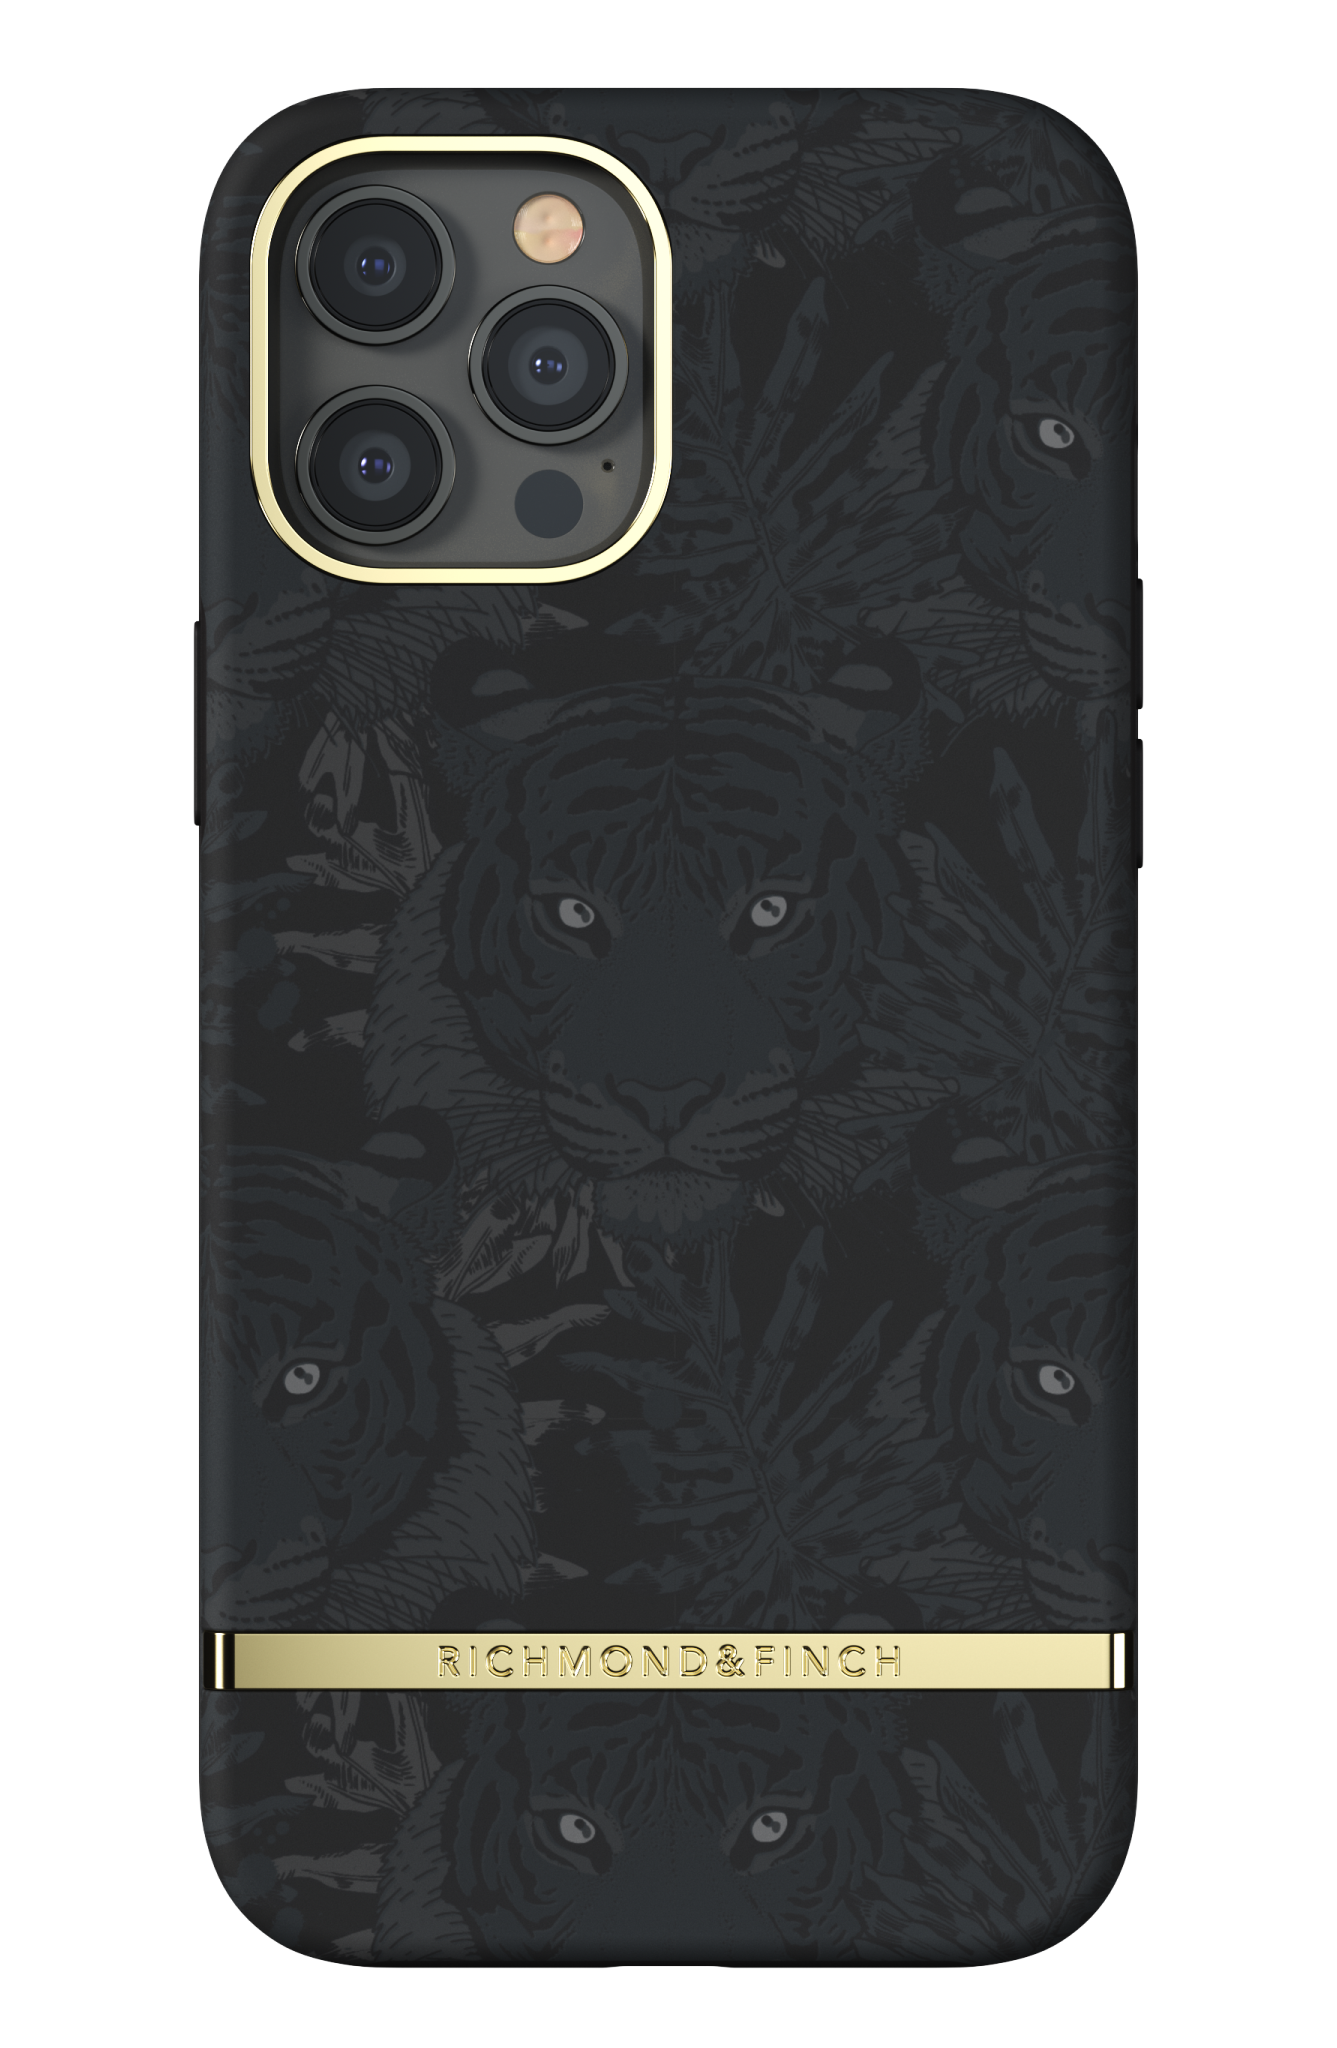 RICHMOND & FINCH Black Tiger Pro Max, Backcover, BLACK iPhone IPHONE 12 MAX, 12 APPLE, PRO